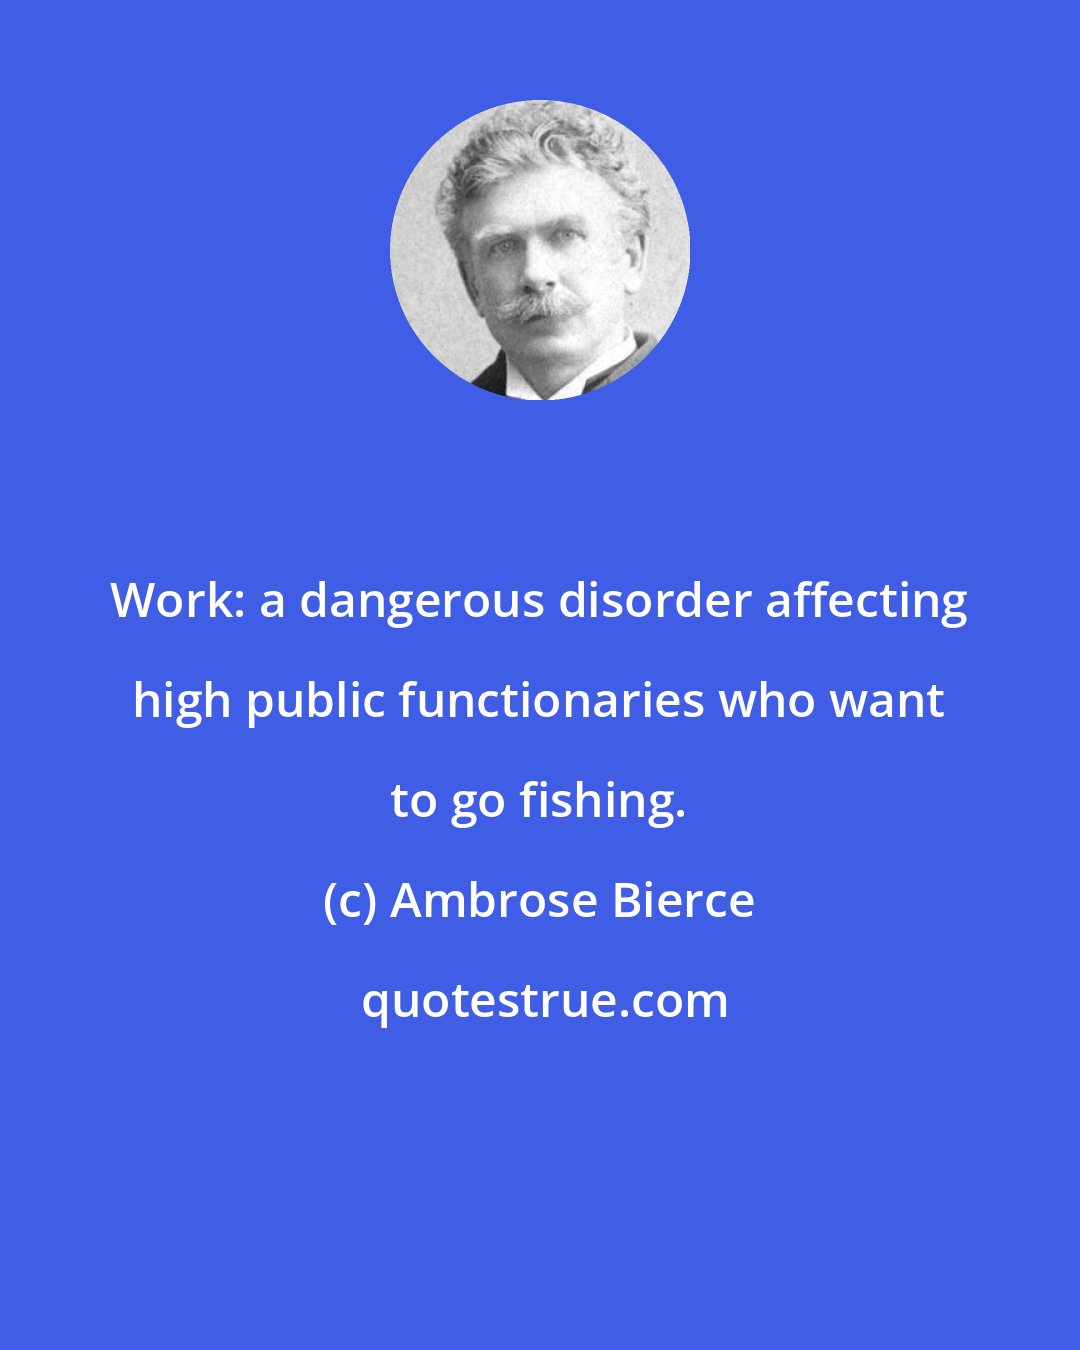 Ambrose Bierce: Work: a dangerous disorder affecting high public functionaries who want to go fishing.